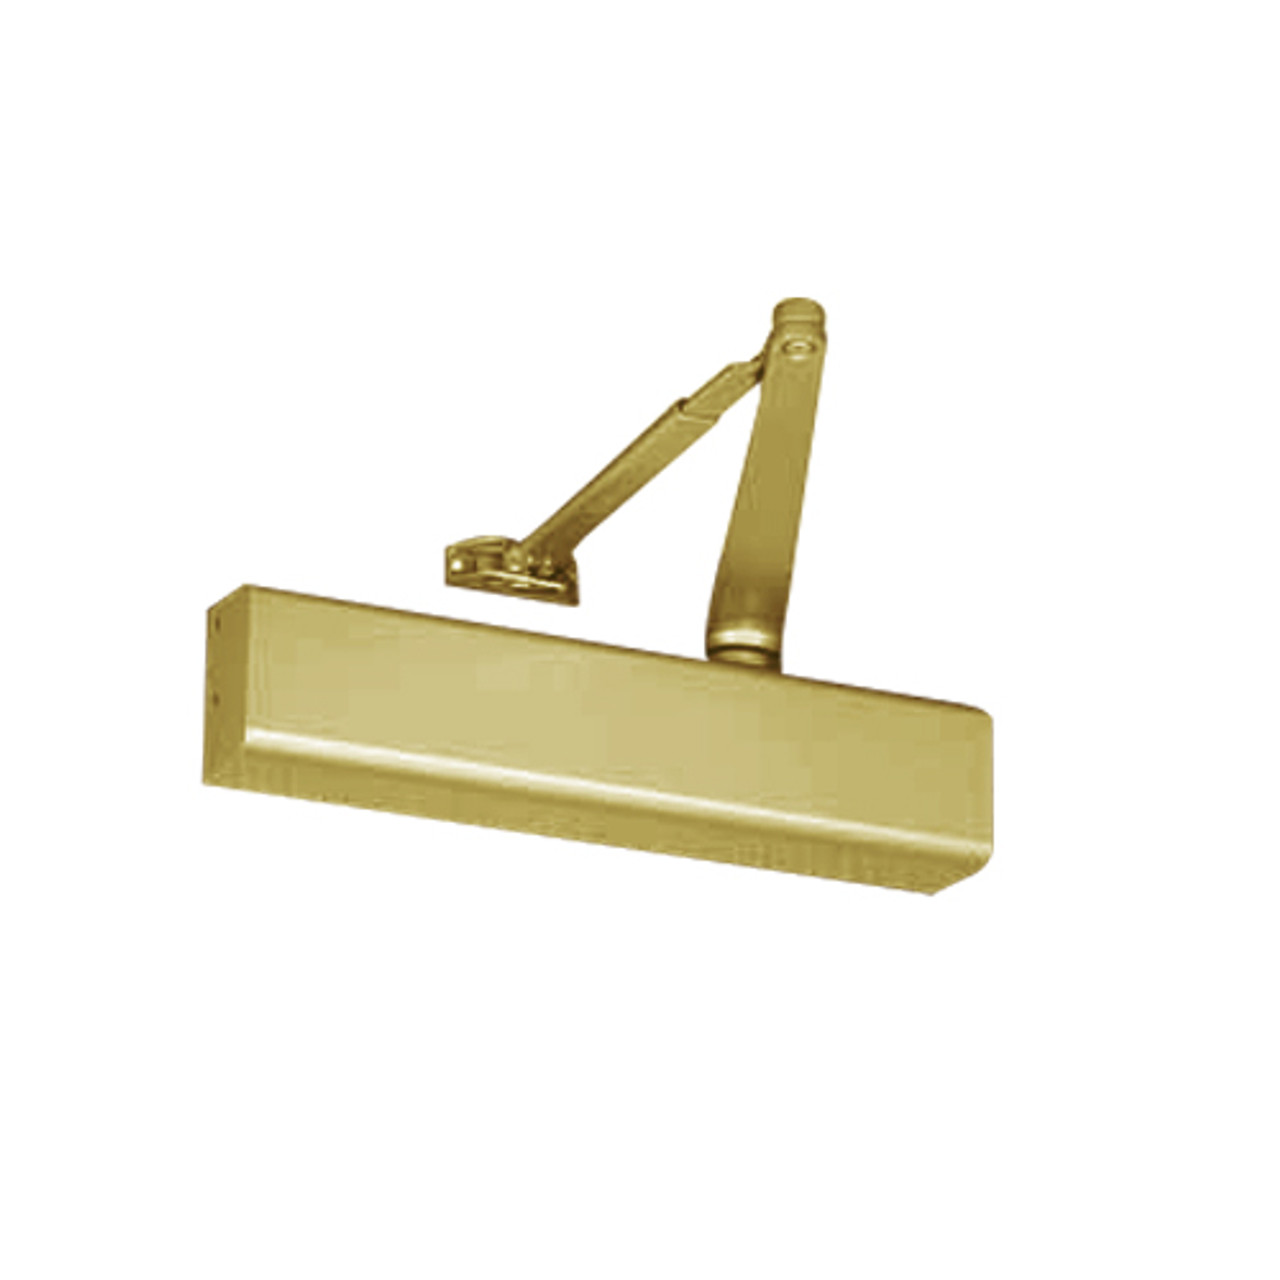 8581M-696 Norton 8000 Series Full Cover Non-Hold Open Door Closers with Regular Low Profile Arm in Gold Finish